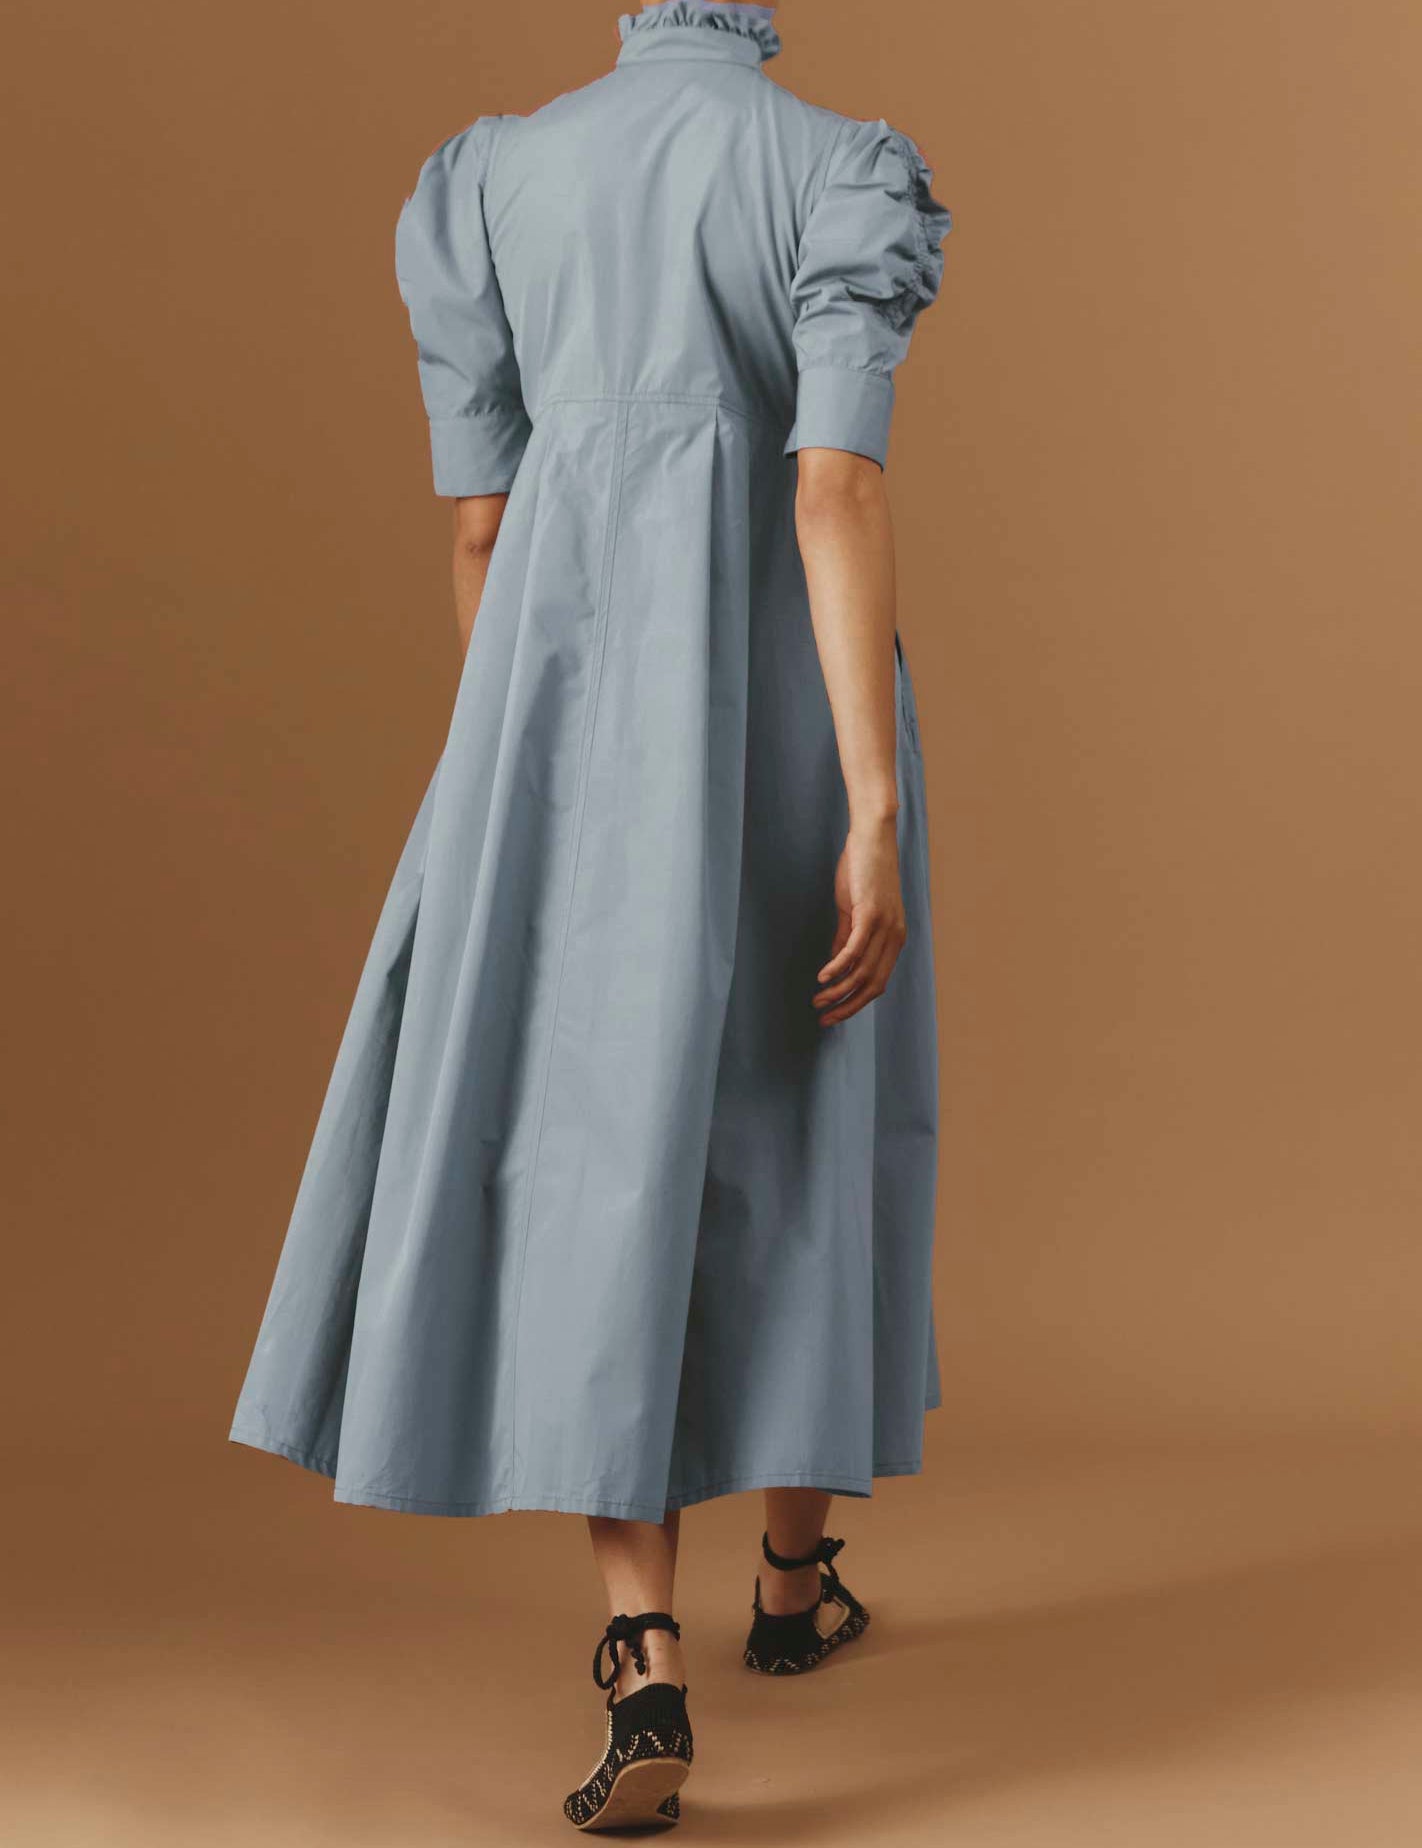 Back view of Venetia Luxury Cotton Blue/Grey Dress by Thierry Colson